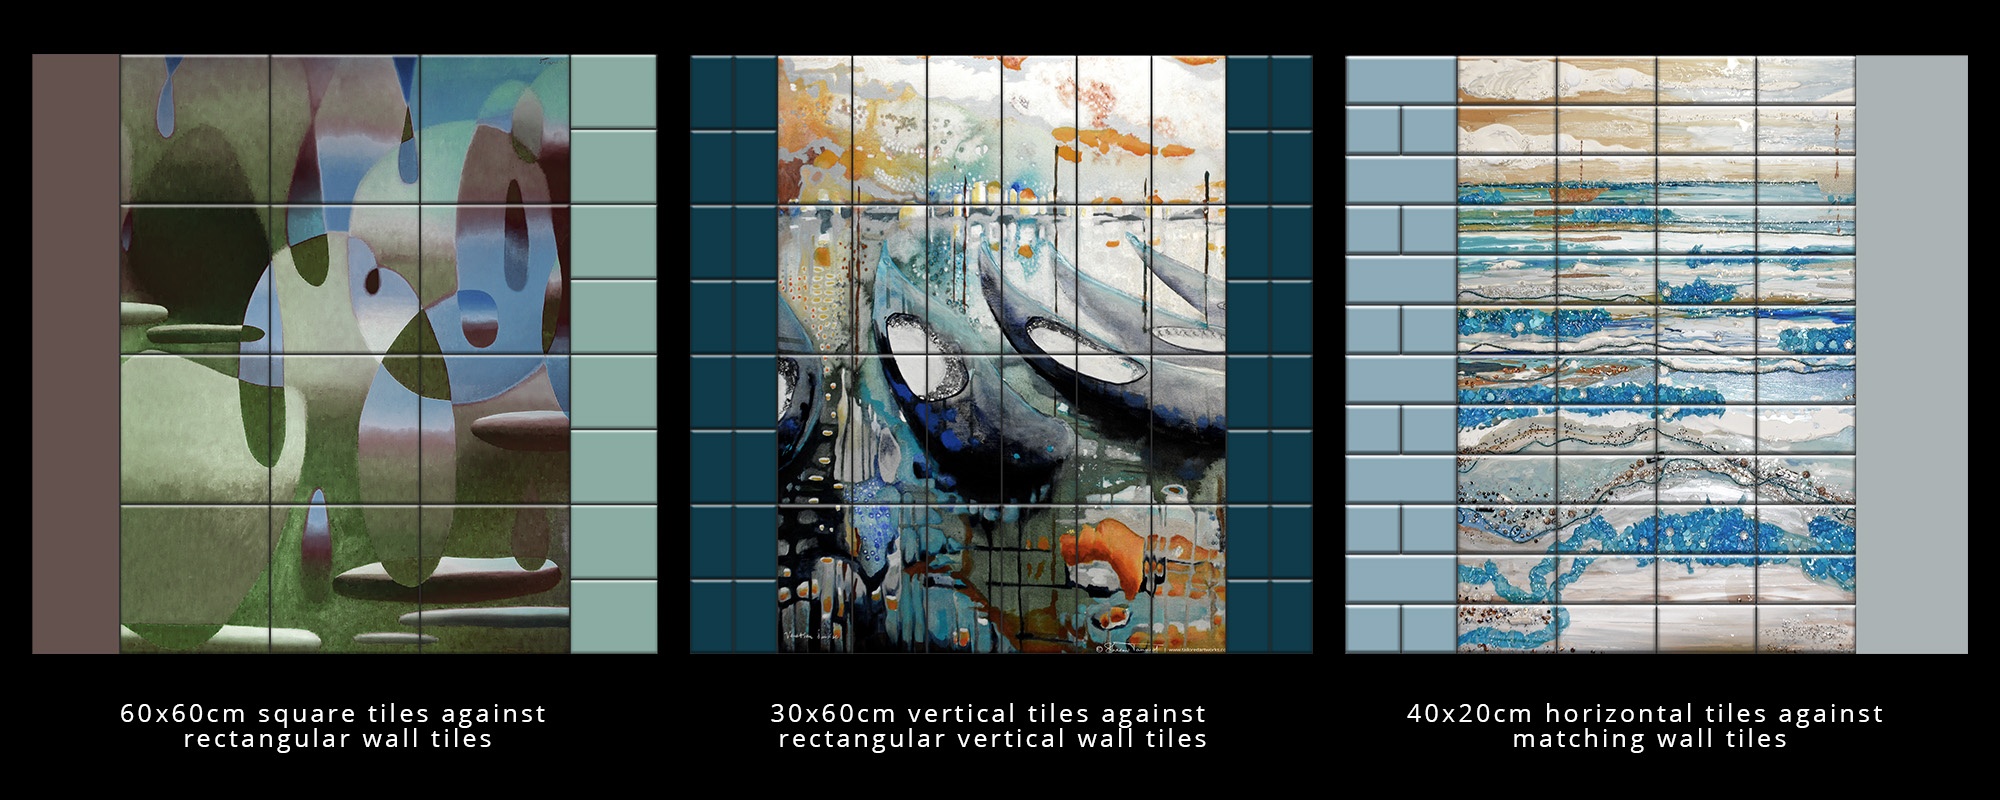 Buy_outdoor_wall_decor_art_direct_from_Artist_Sharron_Tancred_pool_wall_art_ideas_and_beautiful_outdoor_wall_art-by_The_Mural_Shop